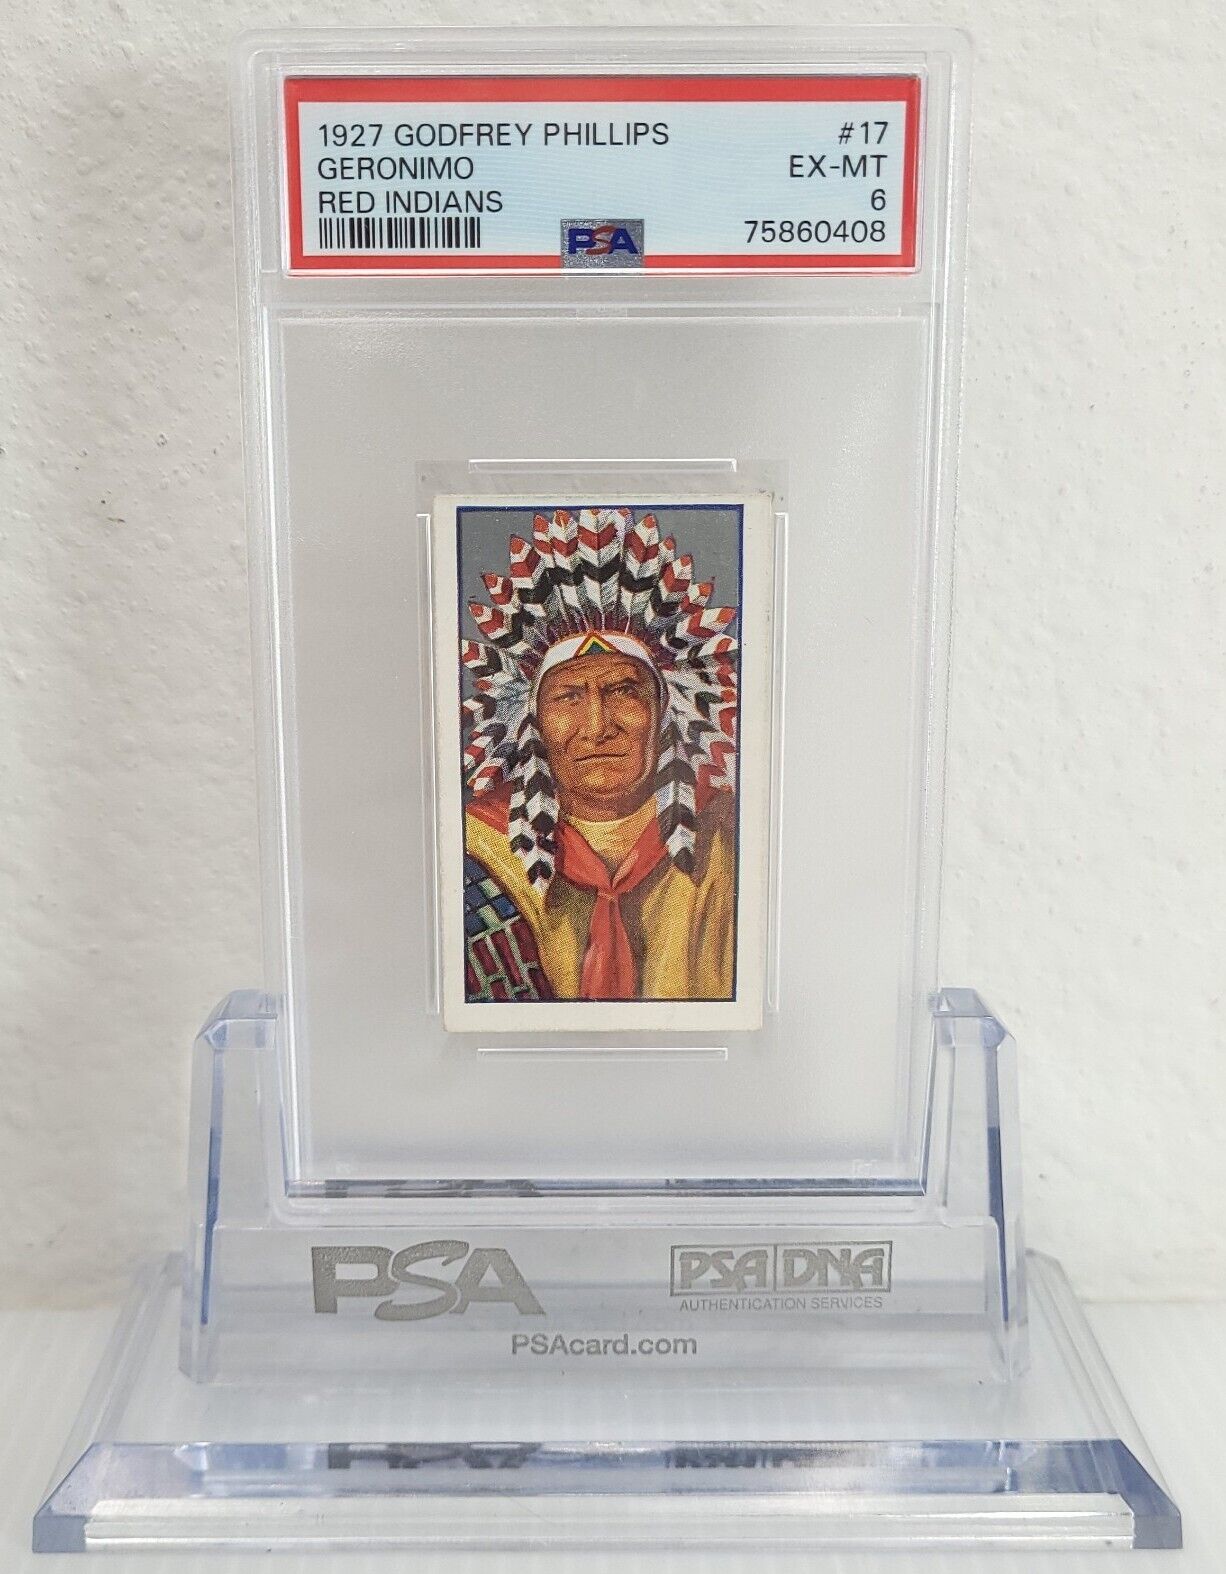 1927 Godfrey Phillips Geronimo #17 Red Indians PSA 6 Apache Chief 